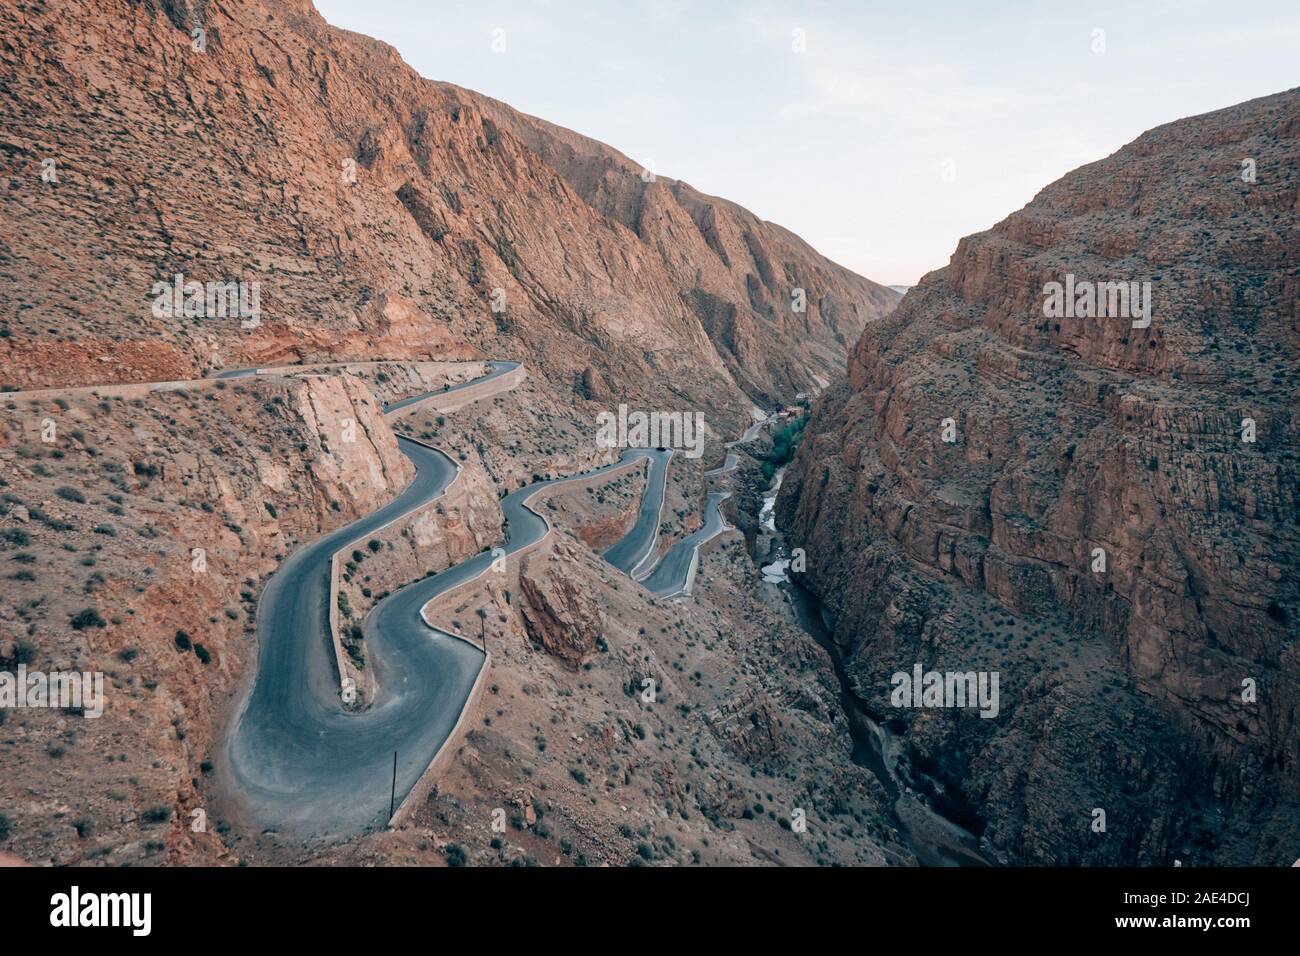 Curvy winding road viewed from the top of Dadas gorge in Morocco Stock Photo